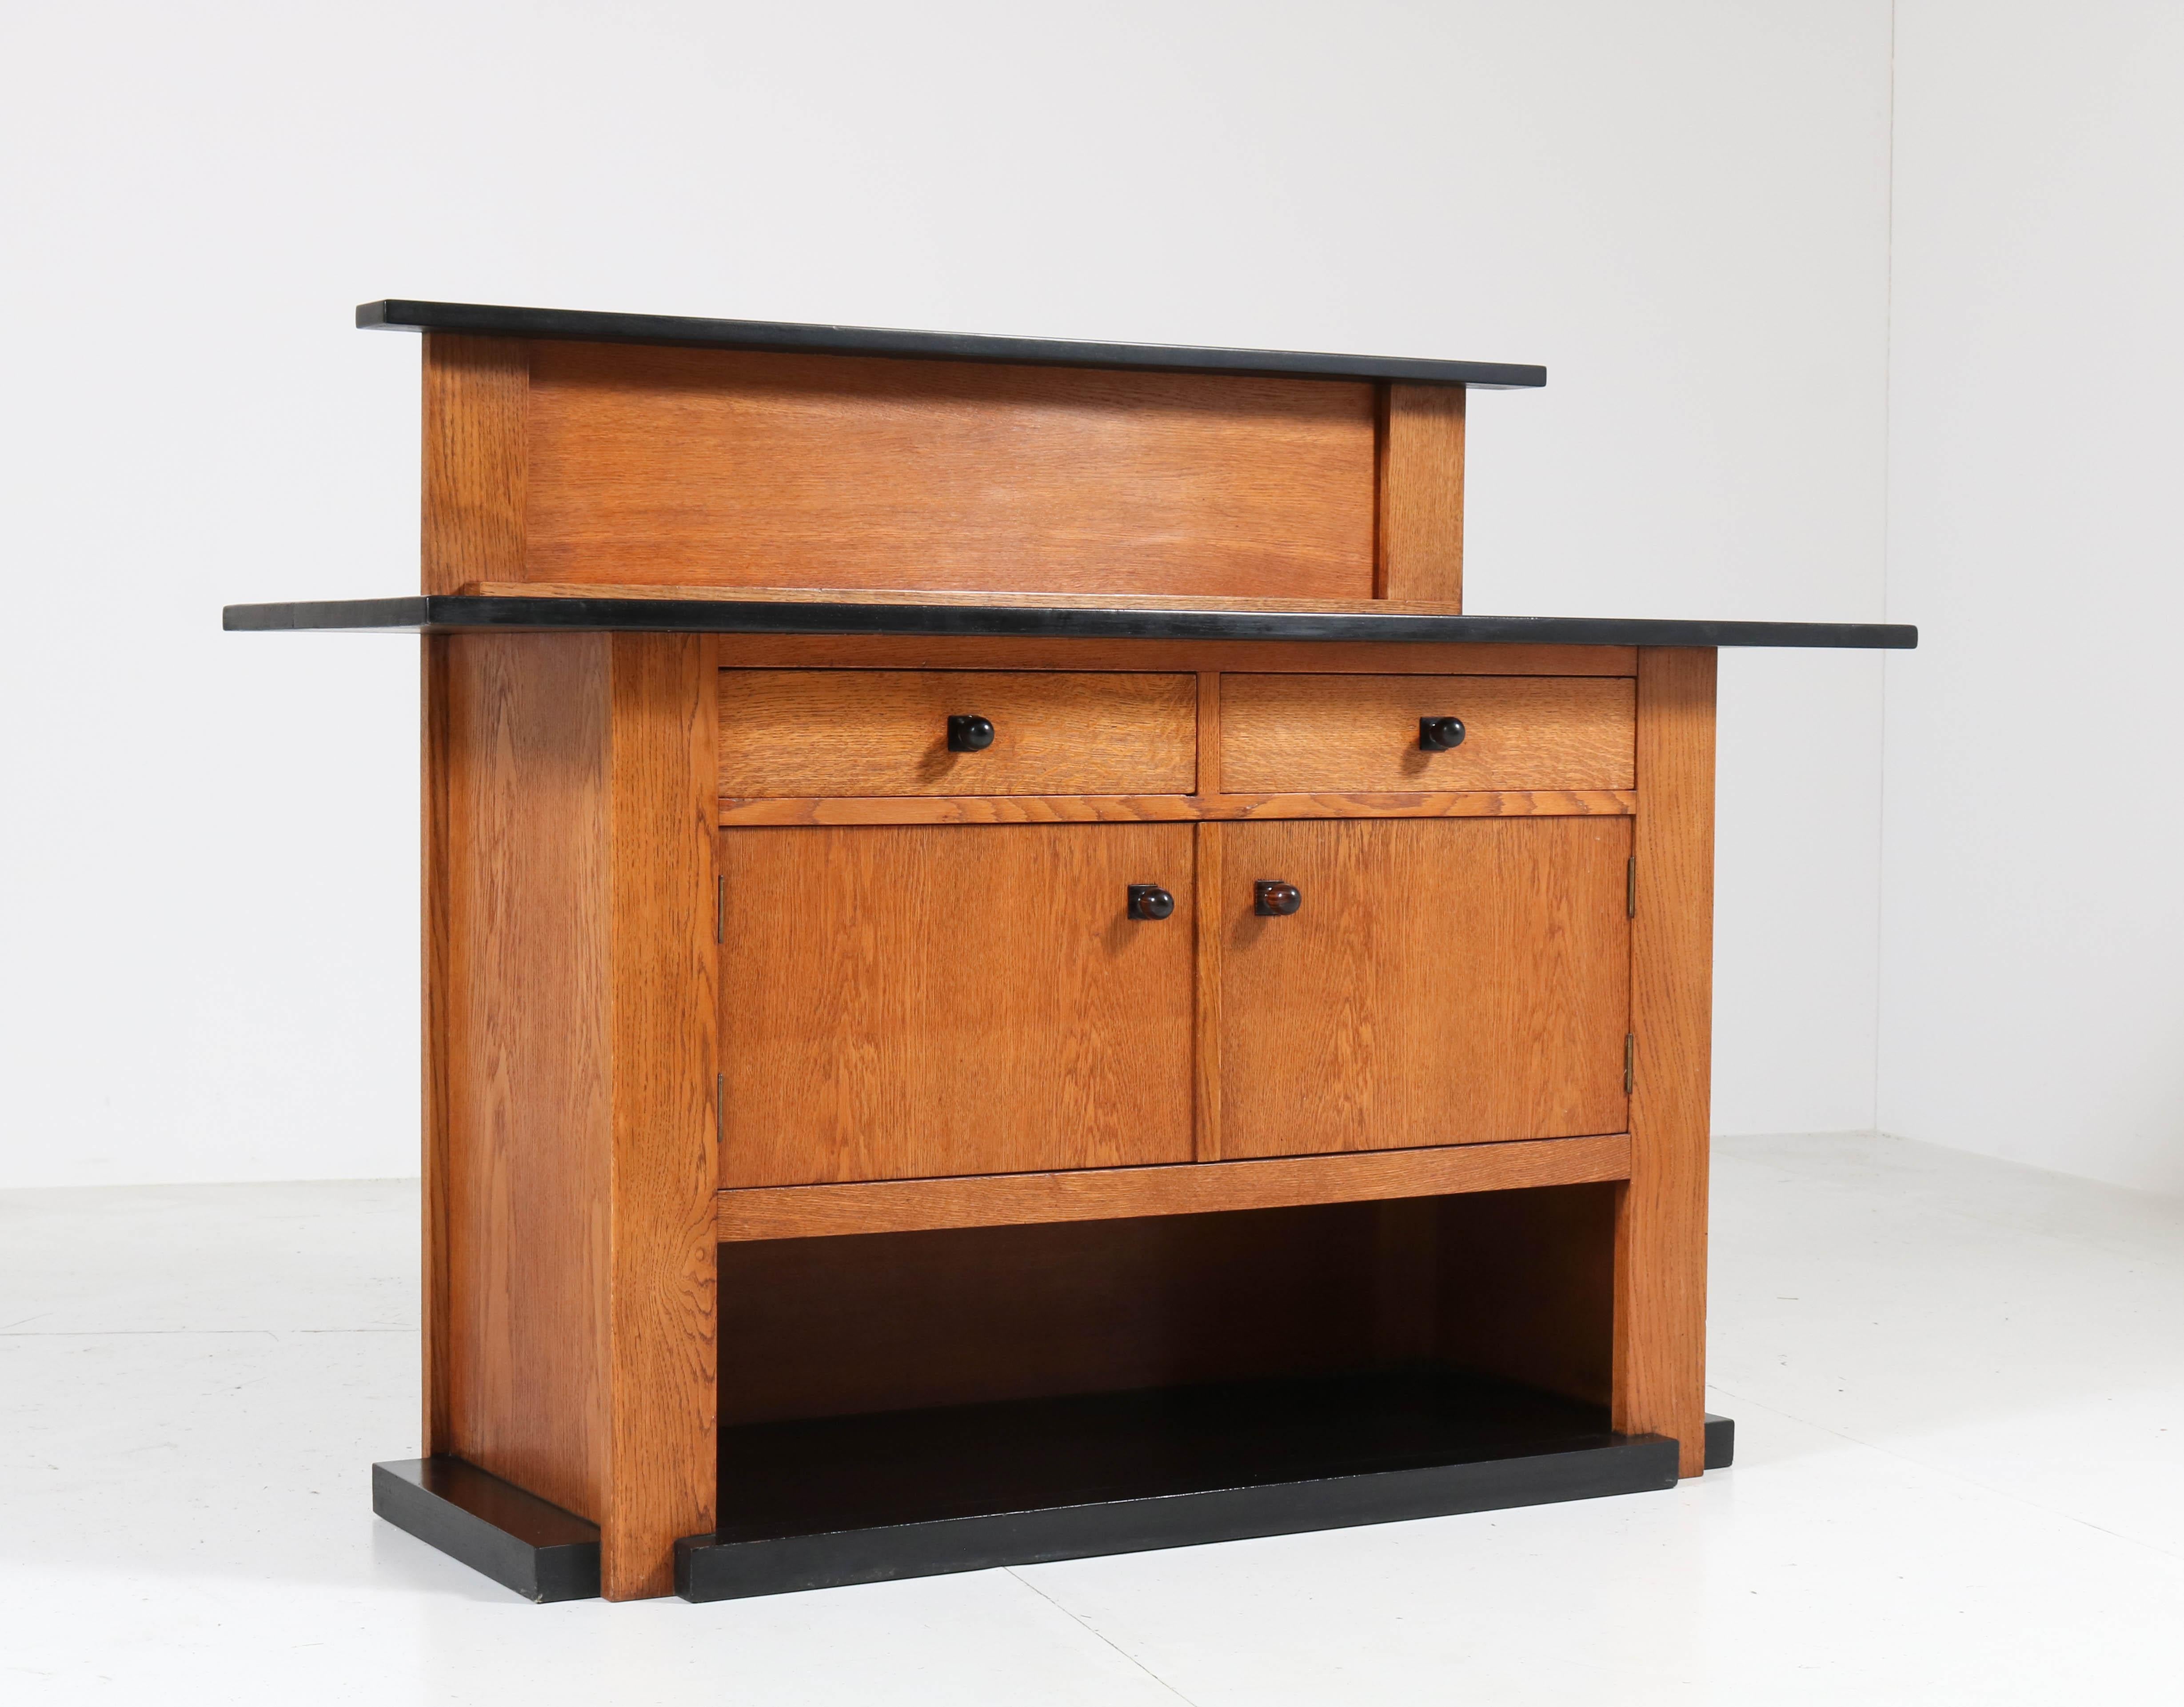 Early 20th Century Oak Art Deco Haagse School Sideboard or Credenza by J.C. Jansen for L.O.V.